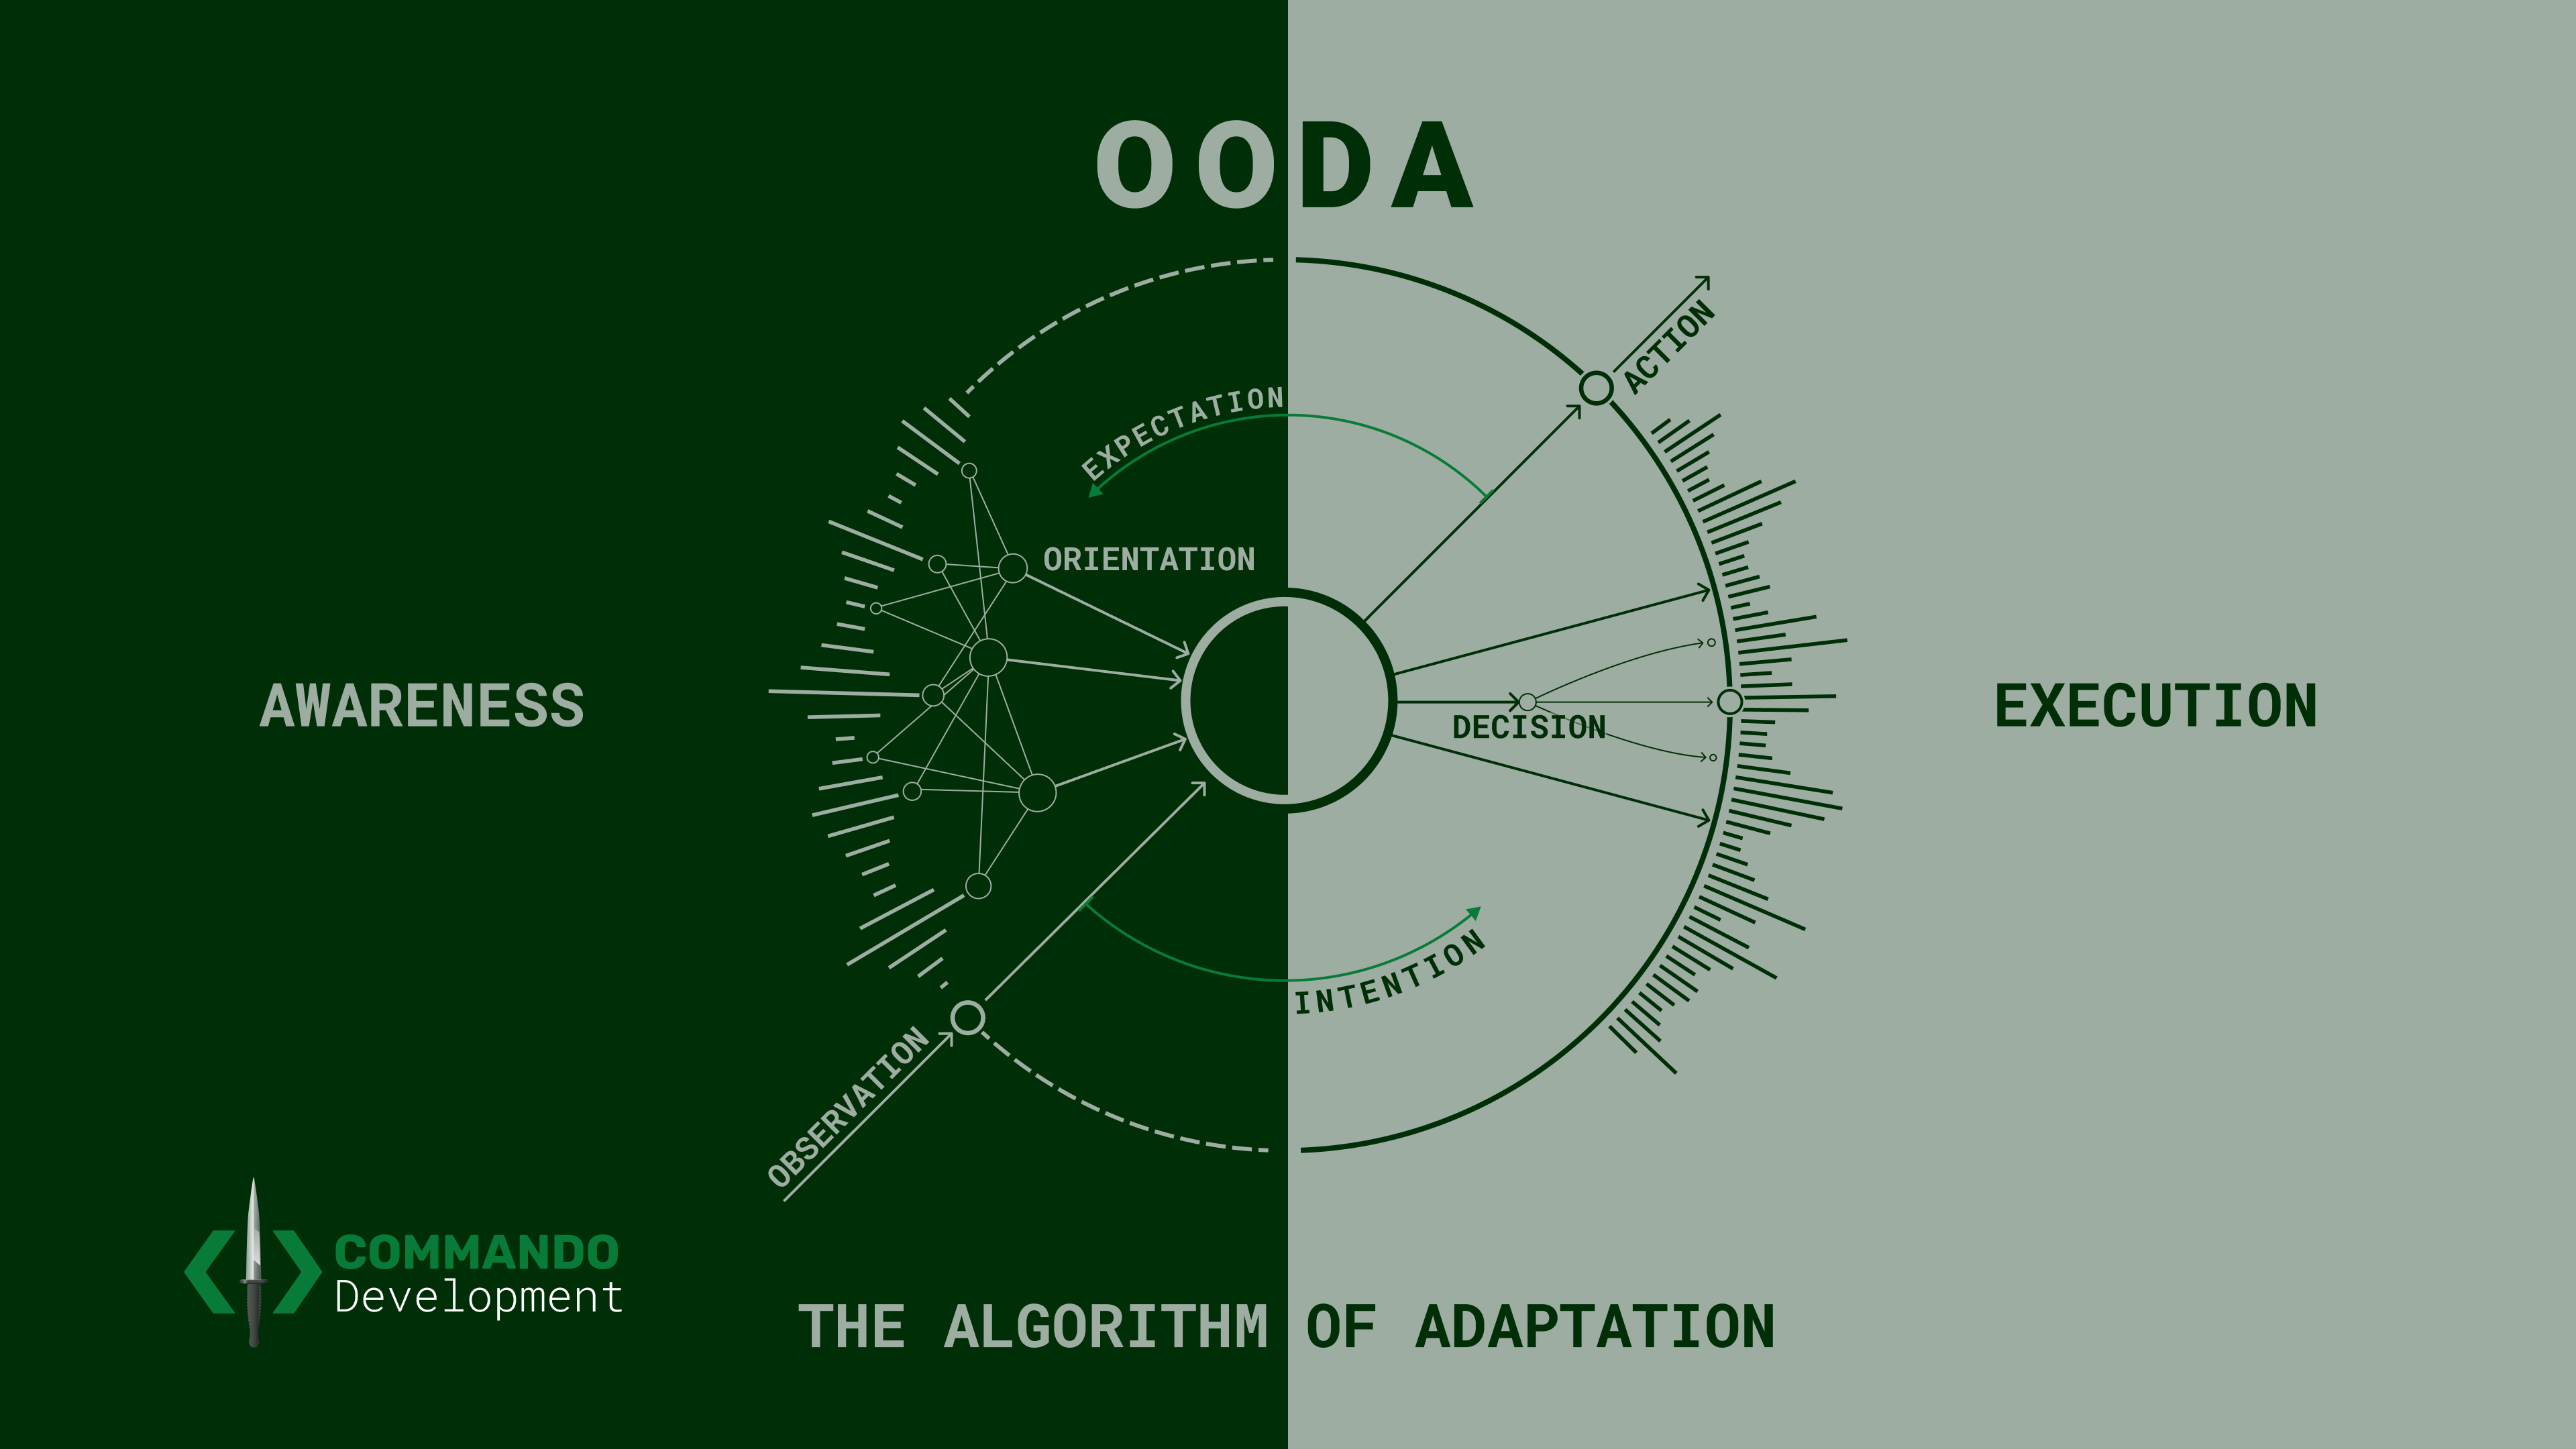 The OODA diagram that is easiest to remember